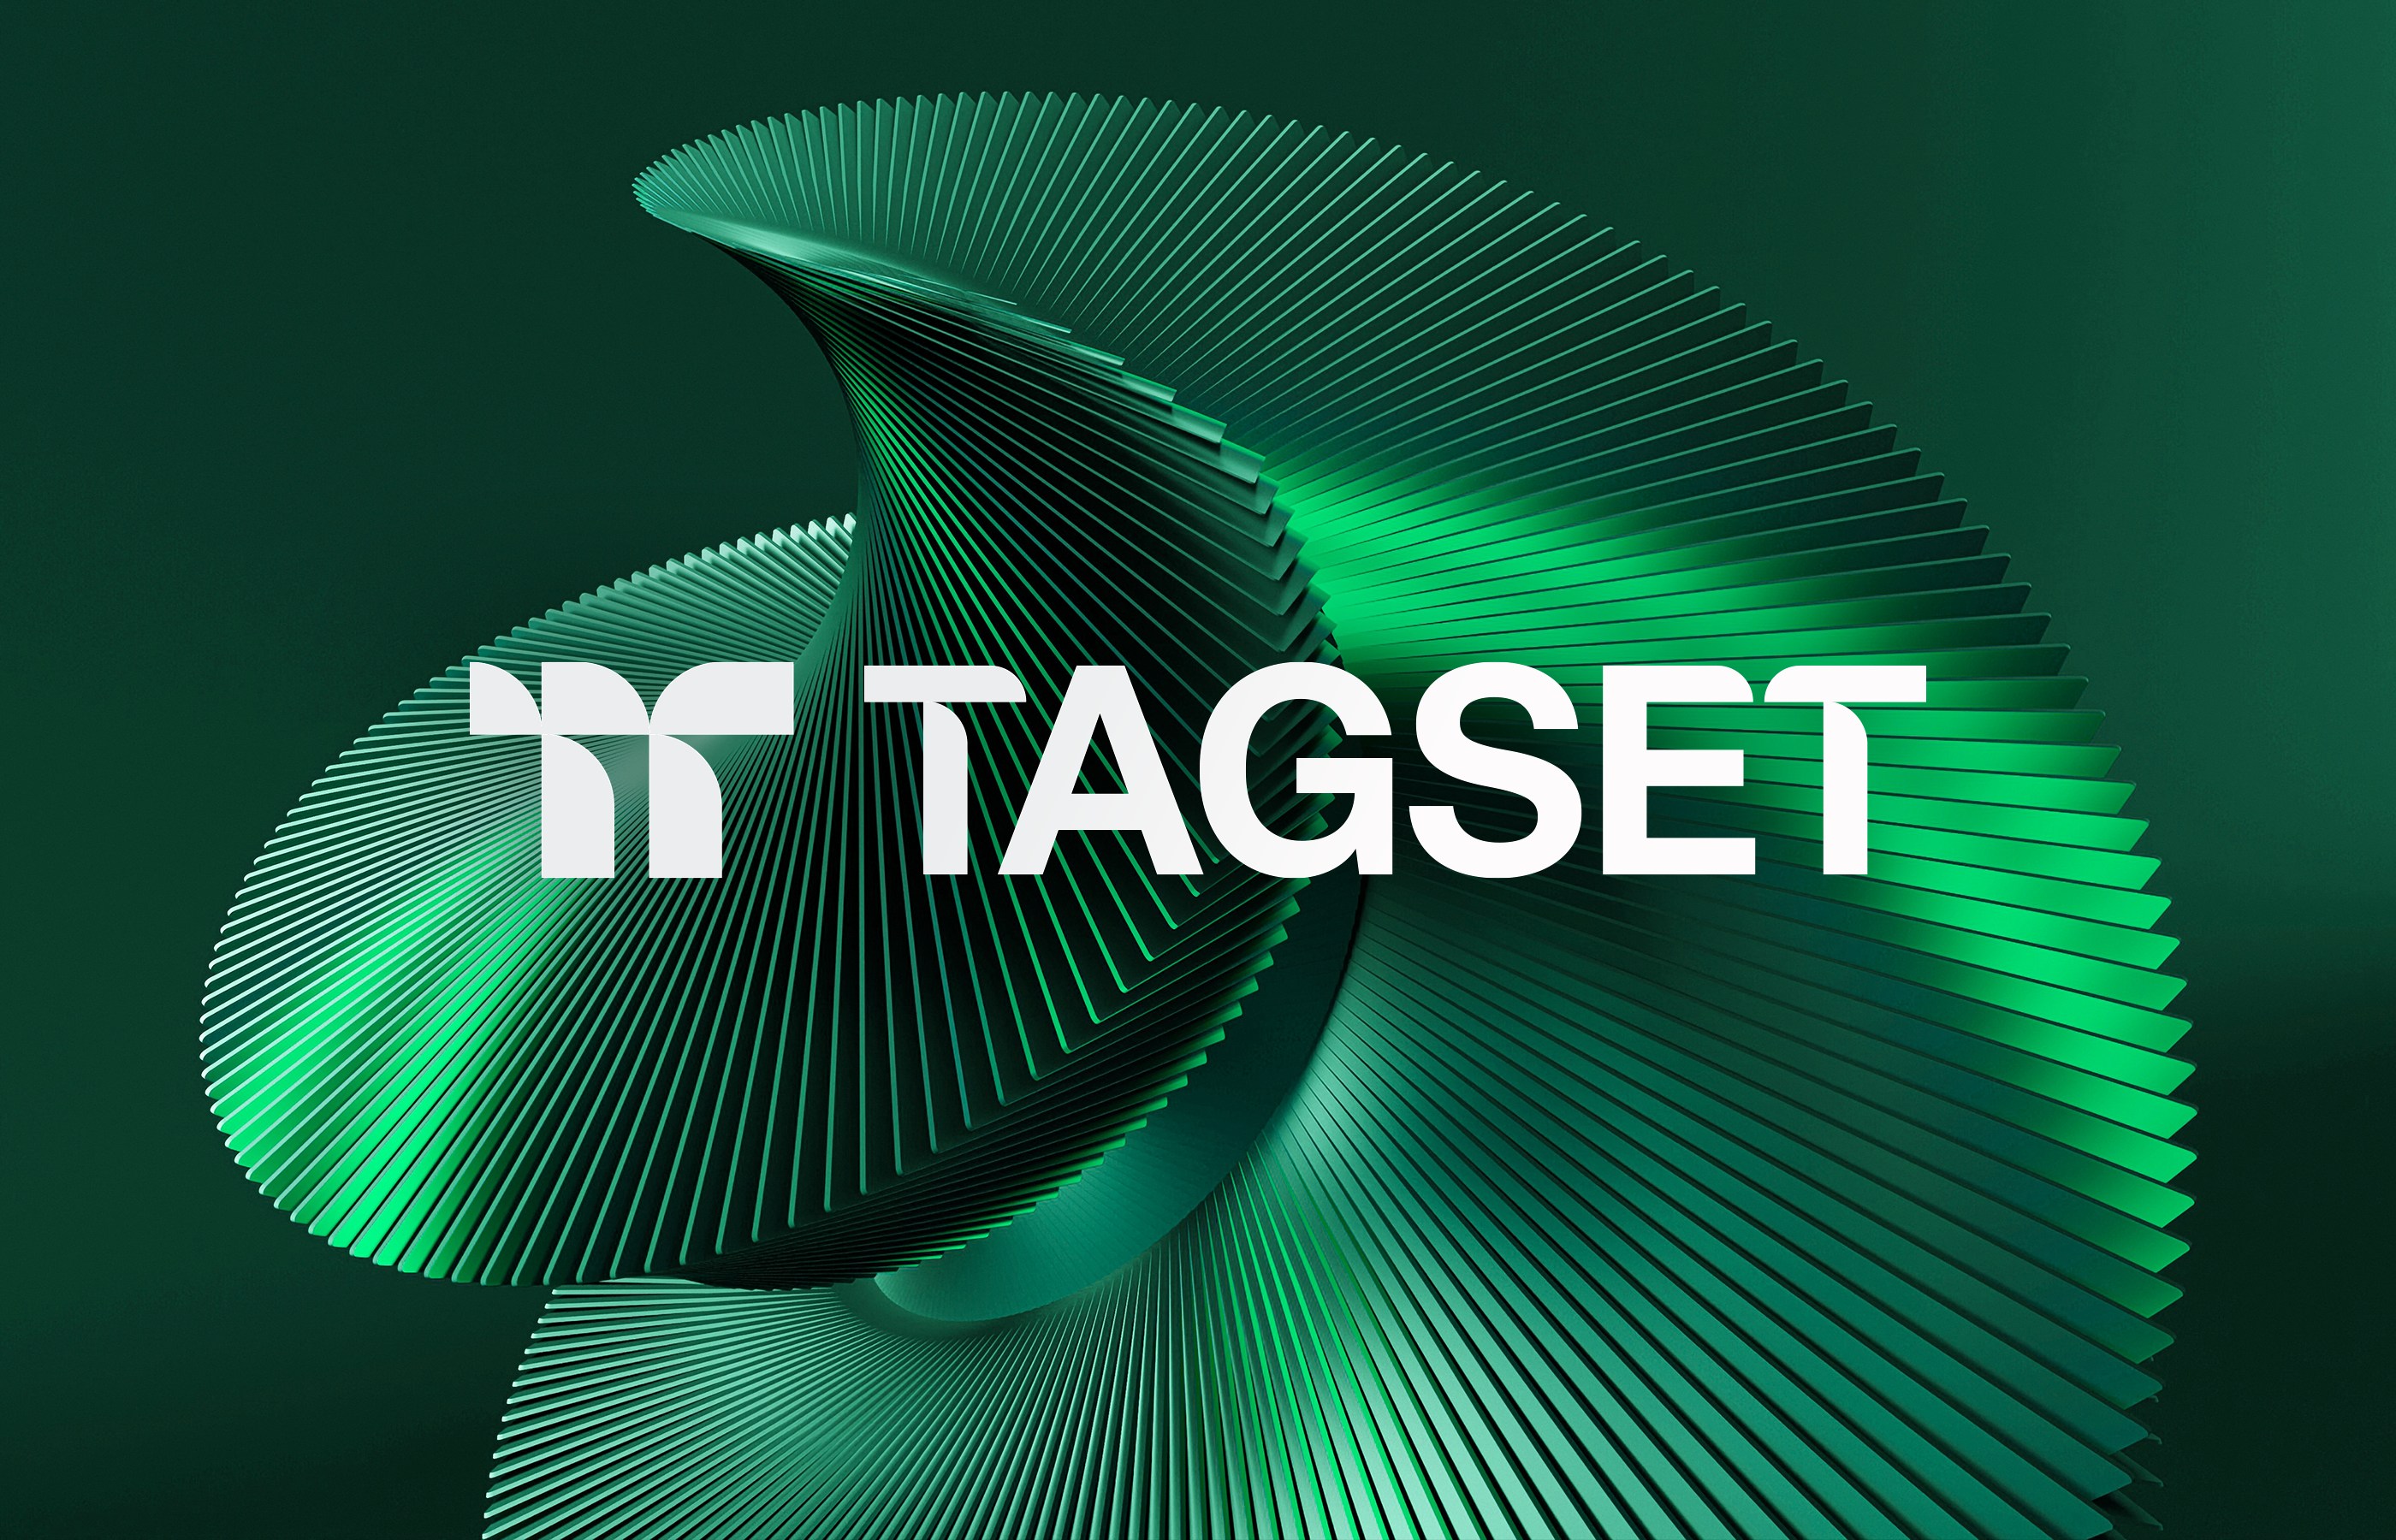 Stacy Saturday Studio Creates Naming and Brand Identity Design for Tagset Group